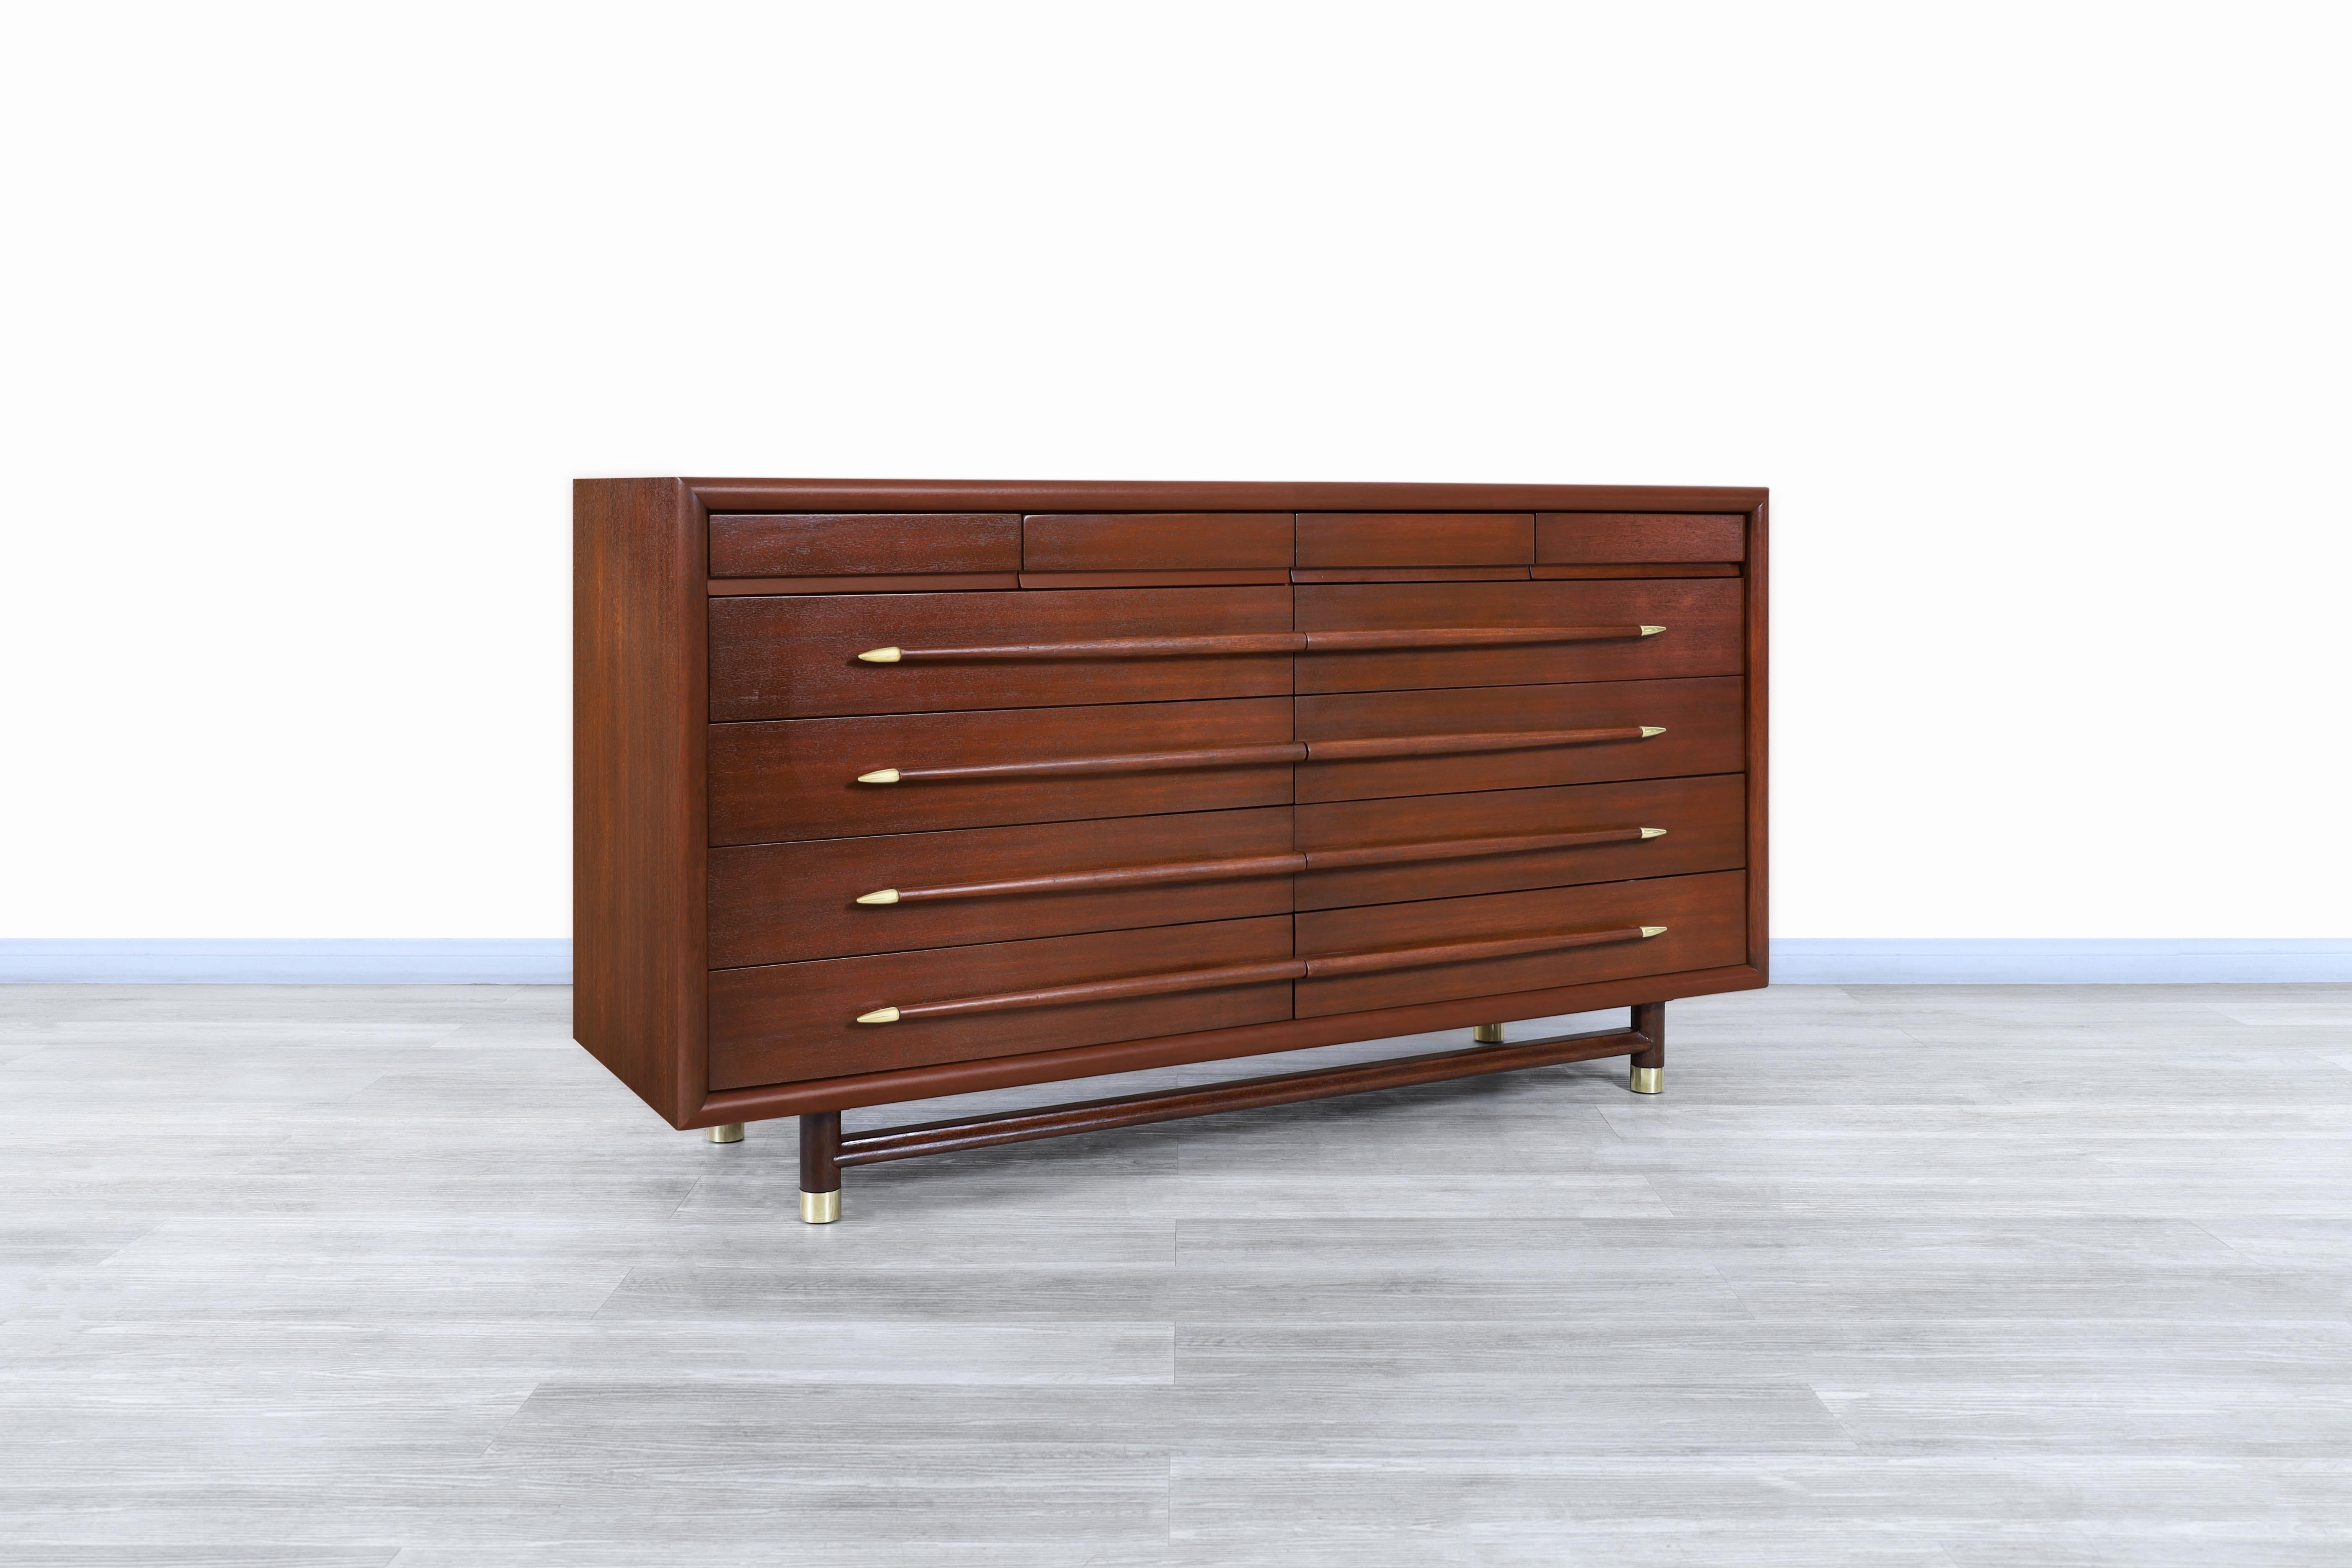 Wonderful mid-century walnut and brass dresser designed by John Keal for Brown Saltman in the United States, circa 1950s. This dresser has been built from the highest quality walnut-stained mahogany wood and has a highly functional design that